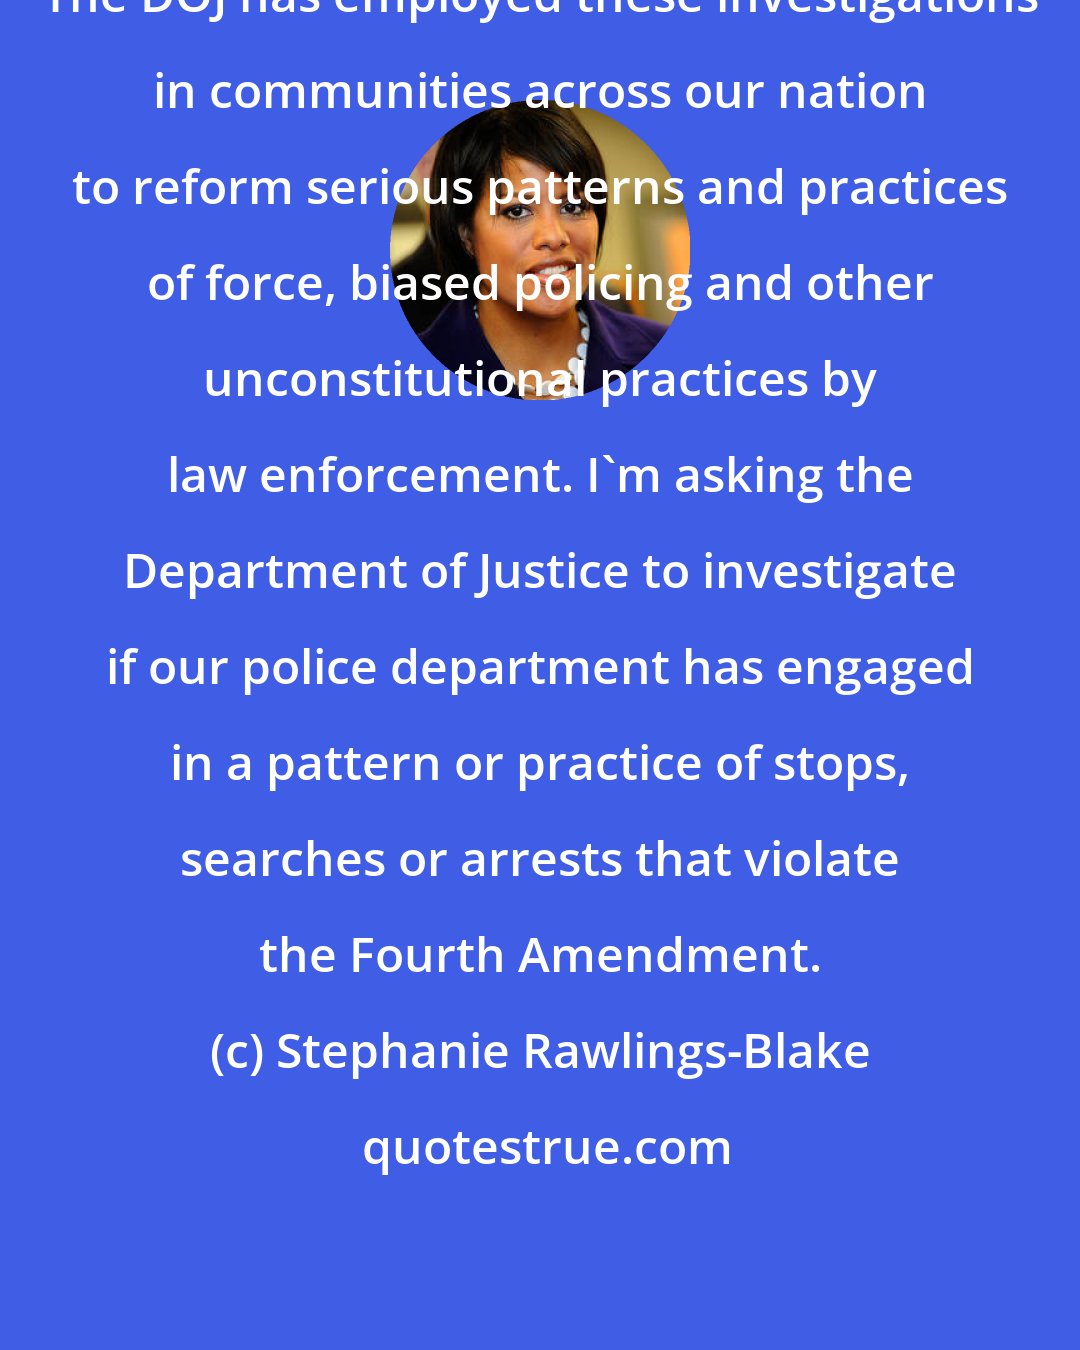 Stephanie Rawlings-Blake: The DOJ has employed these investigations in communities across our nation to reform serious patterns and practices of force, biased policing and other unconstitutional practices by law enforcement. I'm asking the Department of Justice to investigate if our police department has engaged in a pattern or practice of stops, searches or arrests that violate the Fourth Amendment.